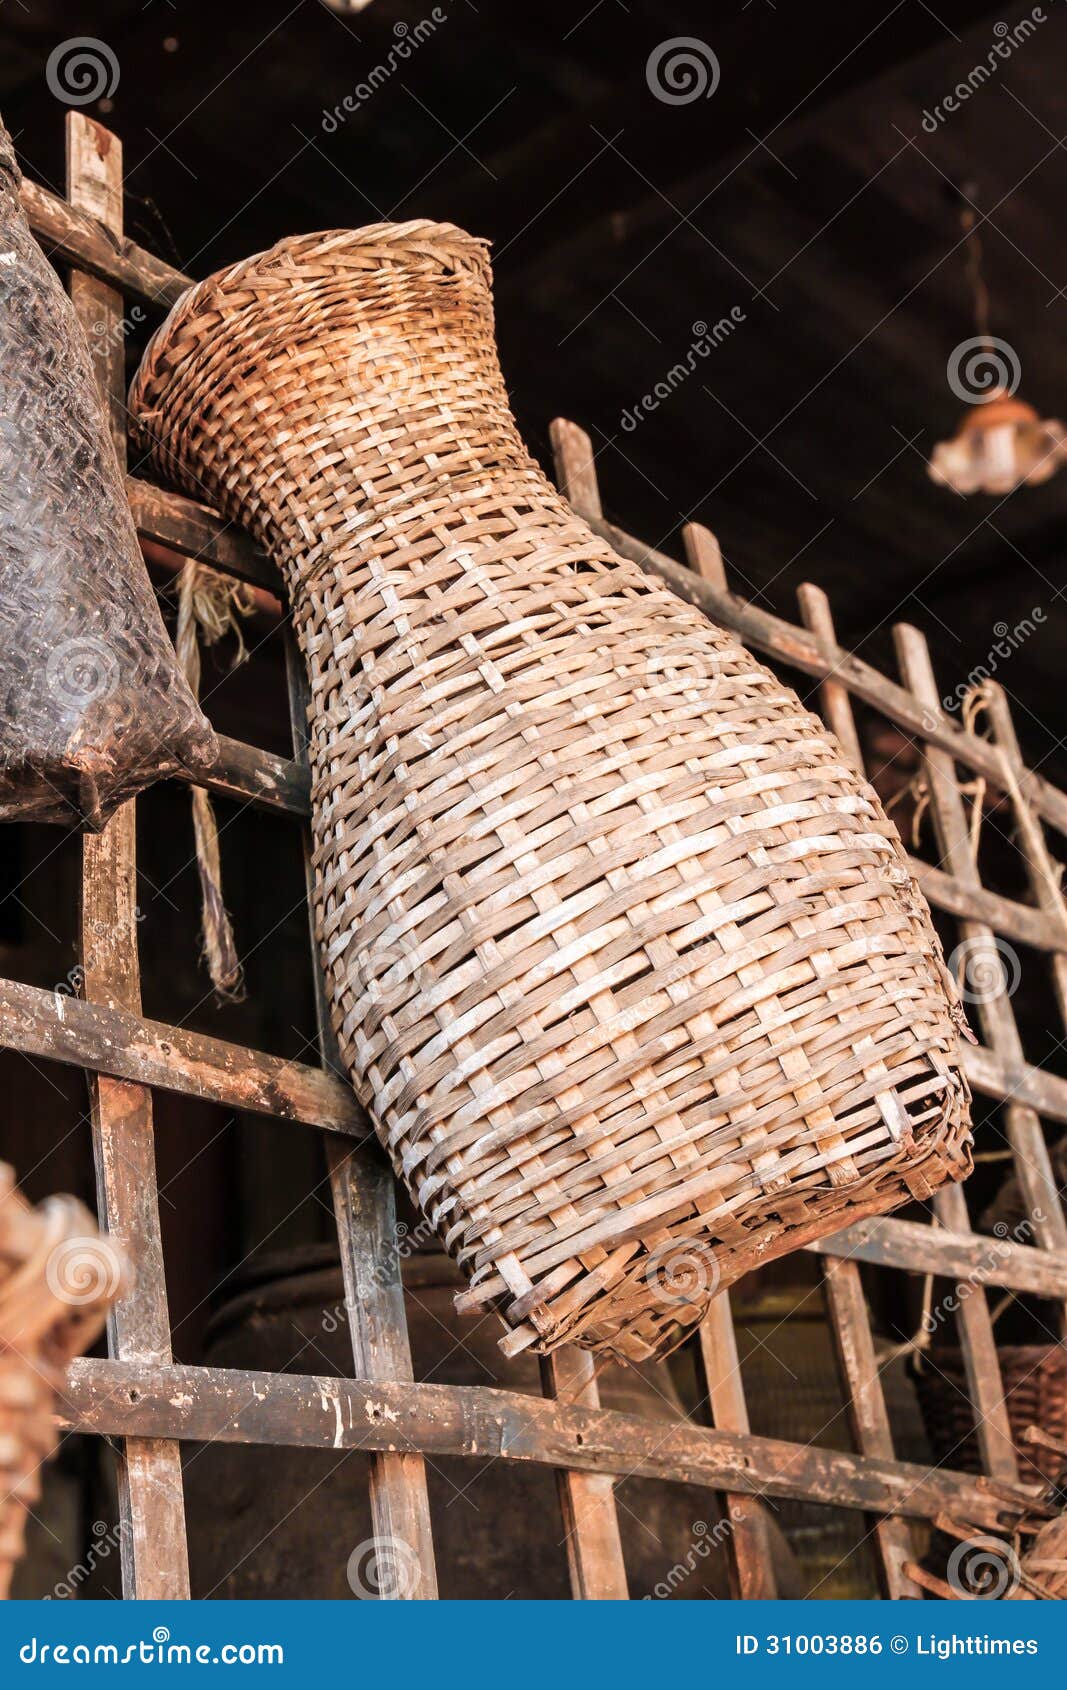 https://thumbs.dreamstime.com/z/bamboo-fish-trap-thai-basket-farmer-use-to-keep-trapped-31003886.jpg